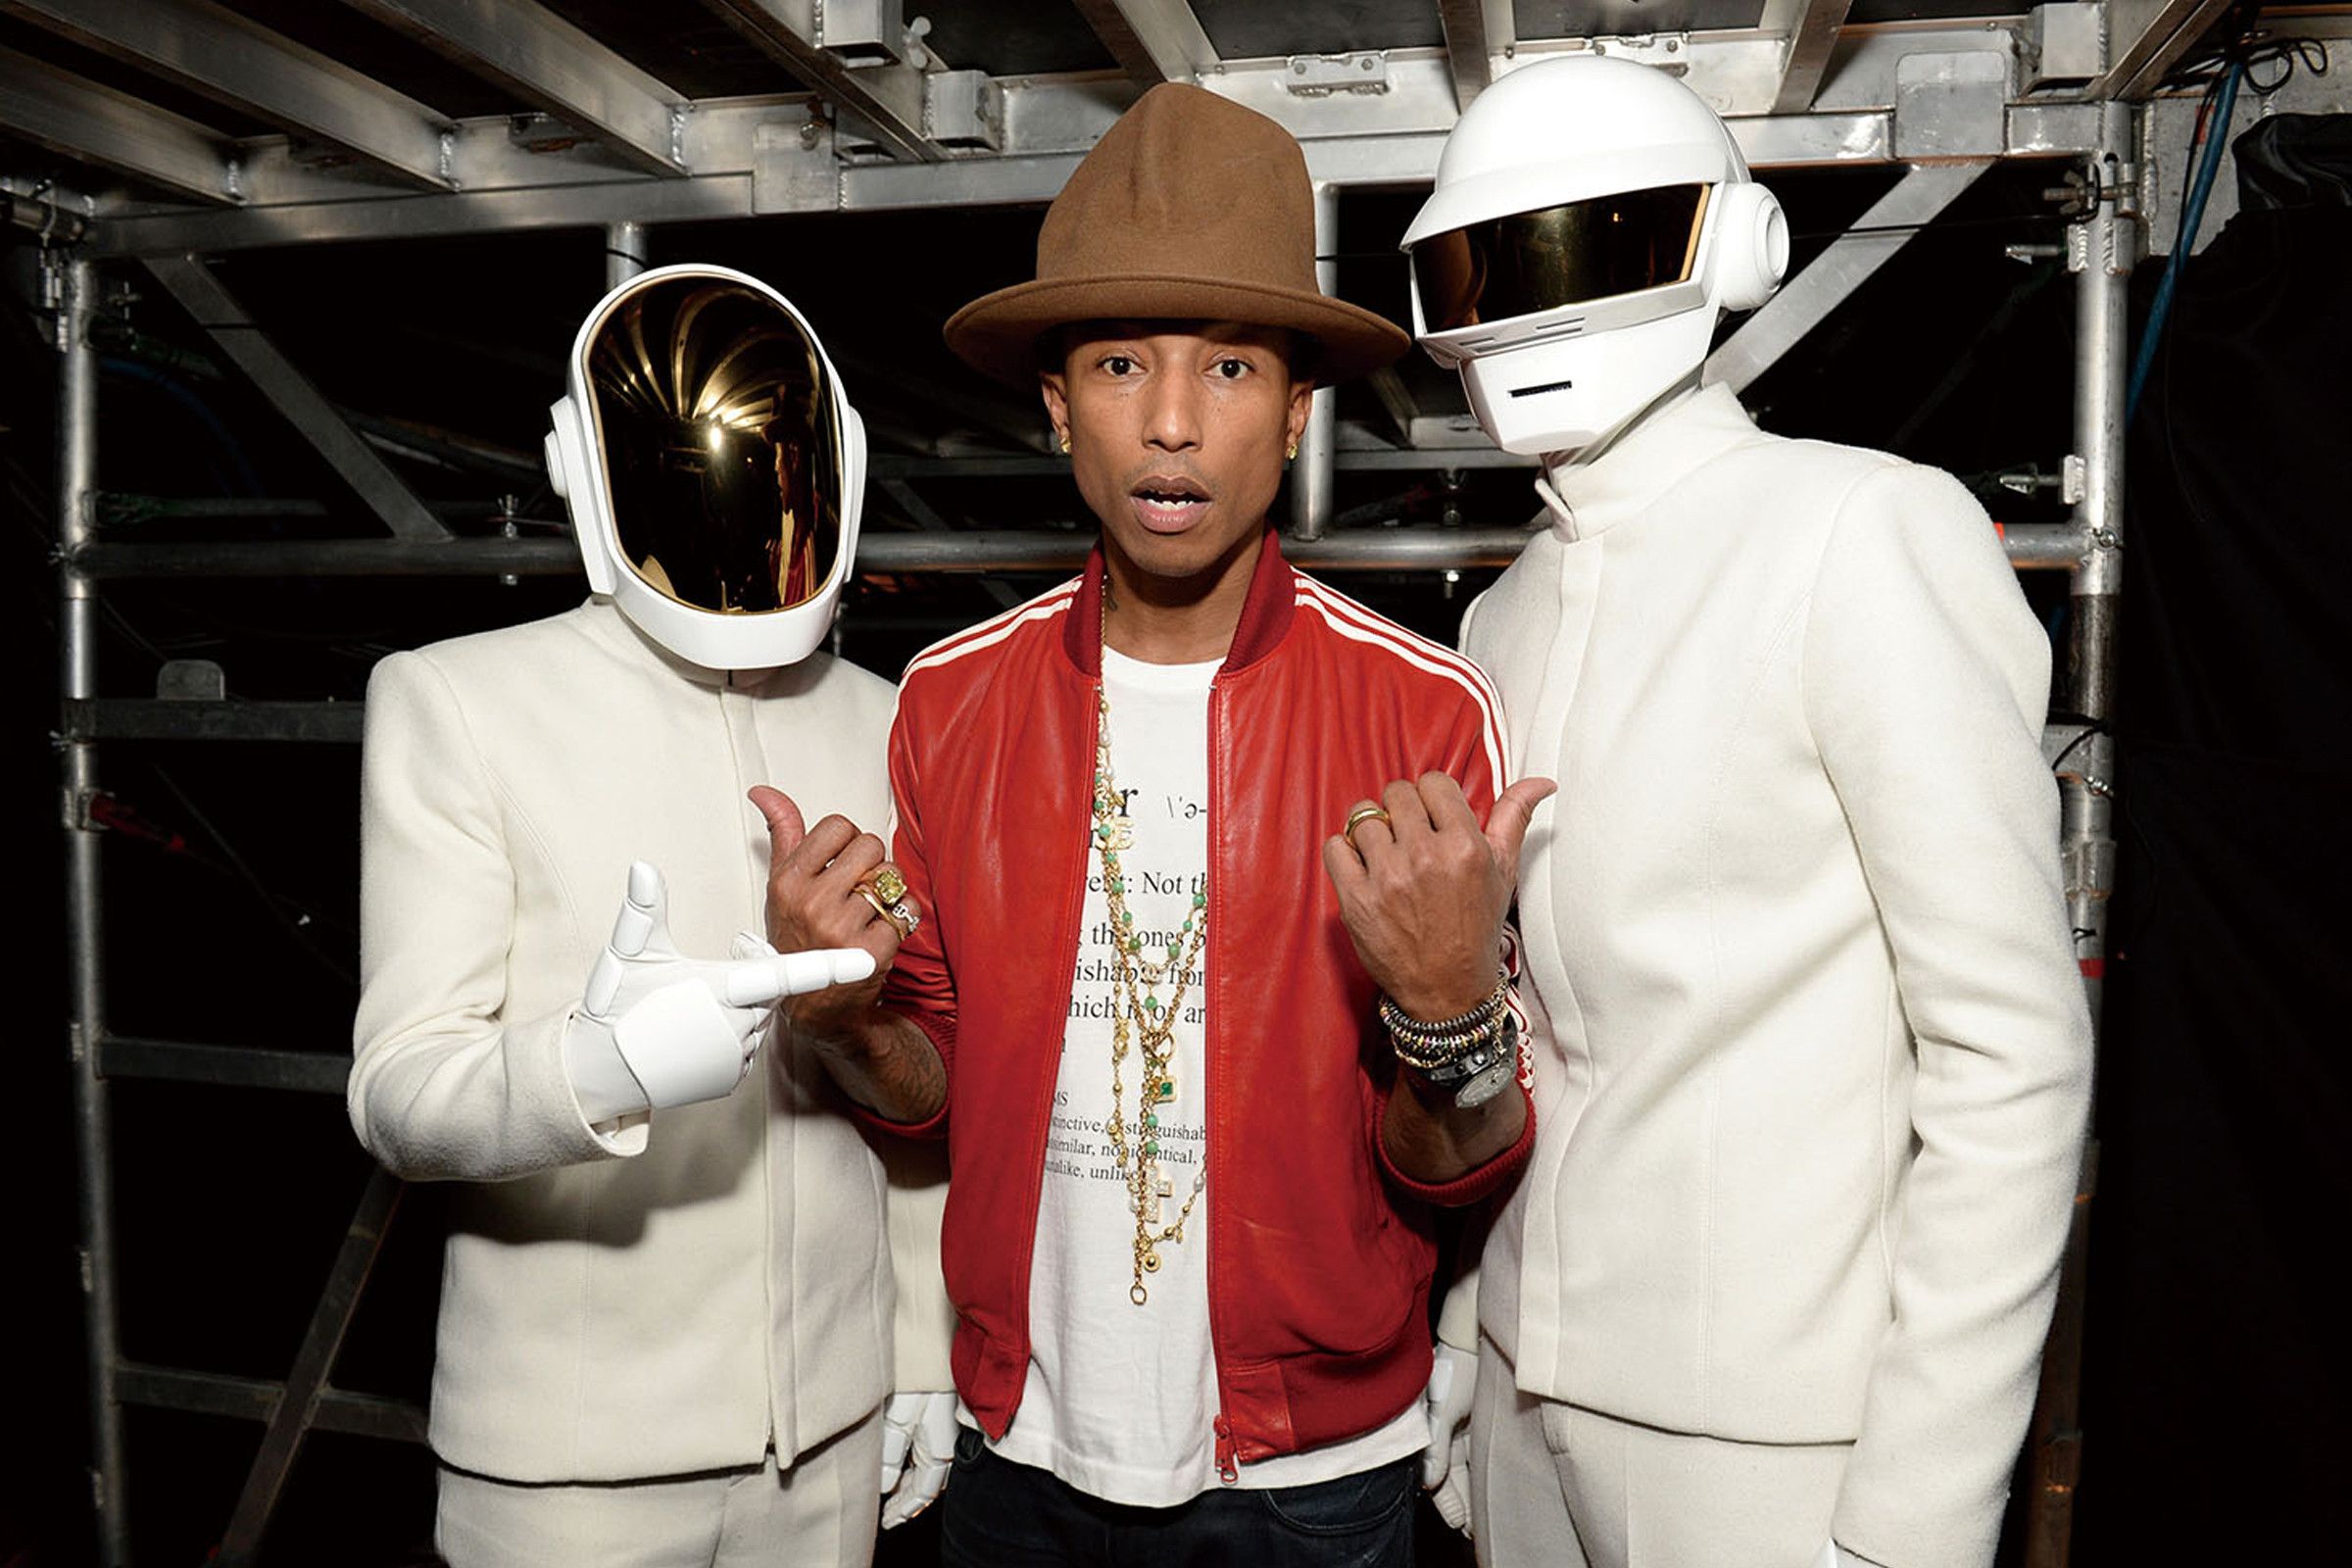 Pharrell backstage with Daft Punk (and his now-infamous Vivenne Westwood hat) at the 2014 Grammy Awards